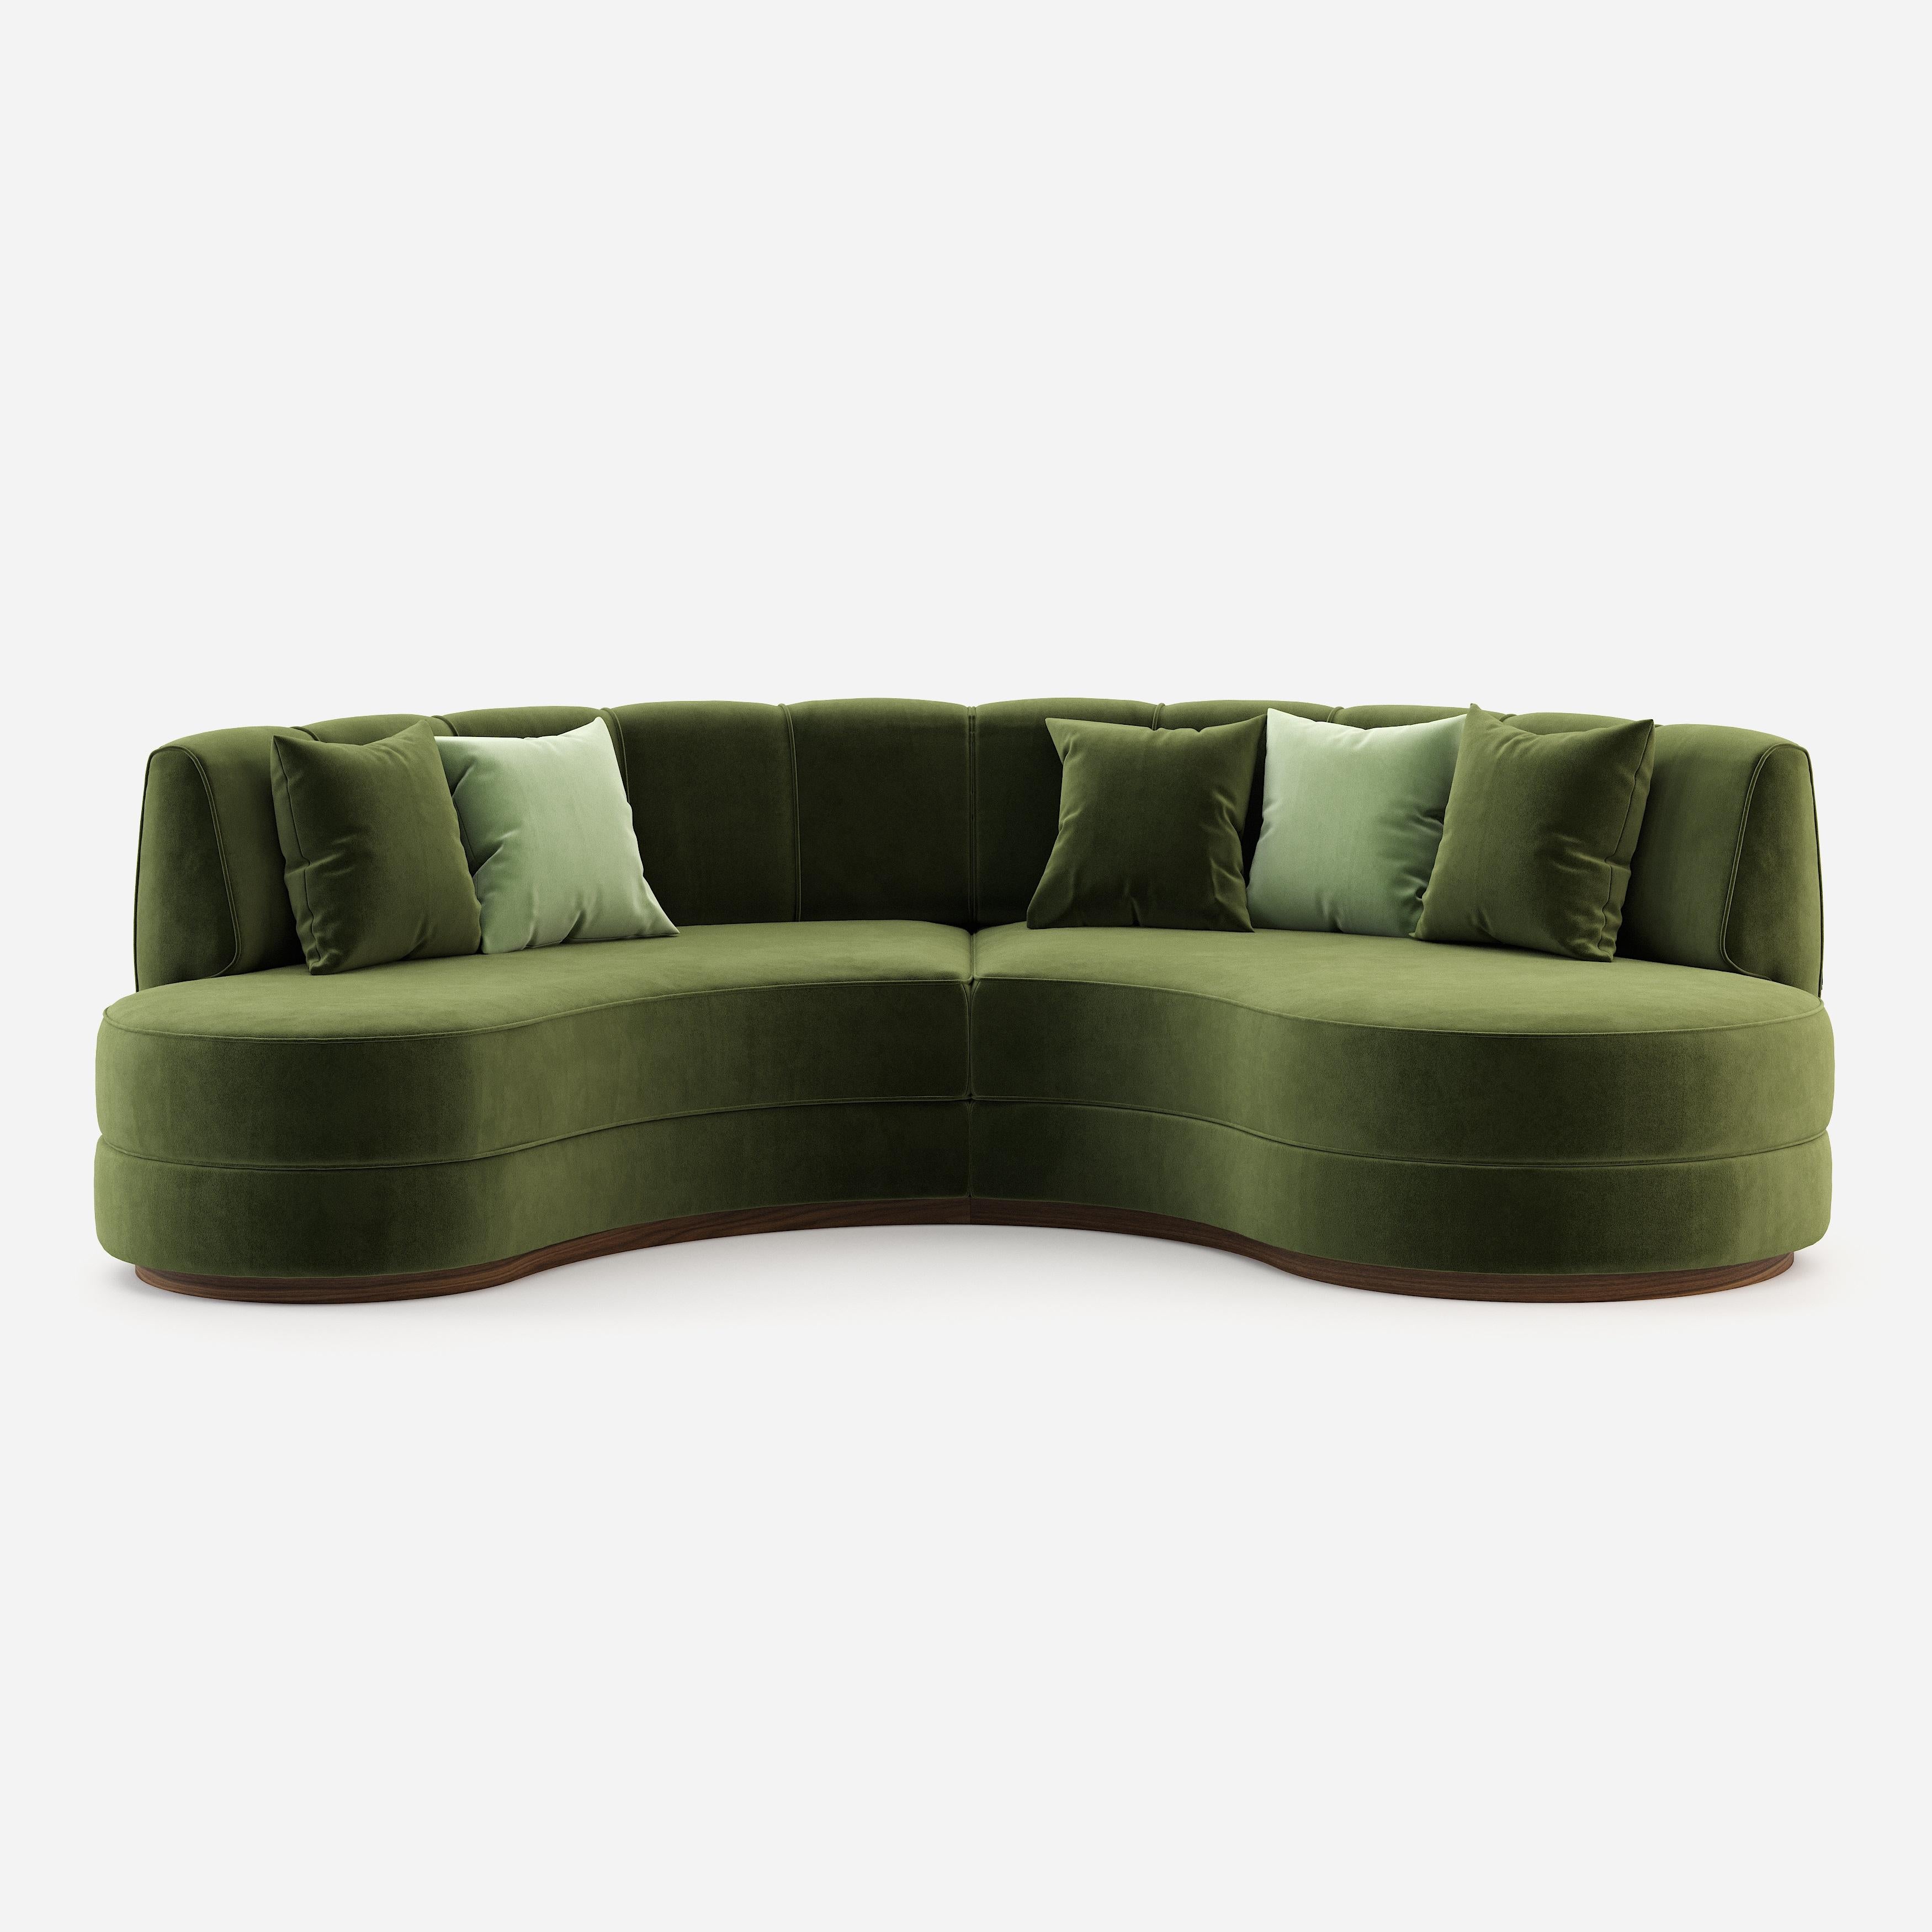 The Sofa inspires itself nature where green is the predominant element and where valleys and hills prevail. The item’s details allow it to be the perfect statement piece for any contemporary or classic interior.
This sofa is offered in a variety of